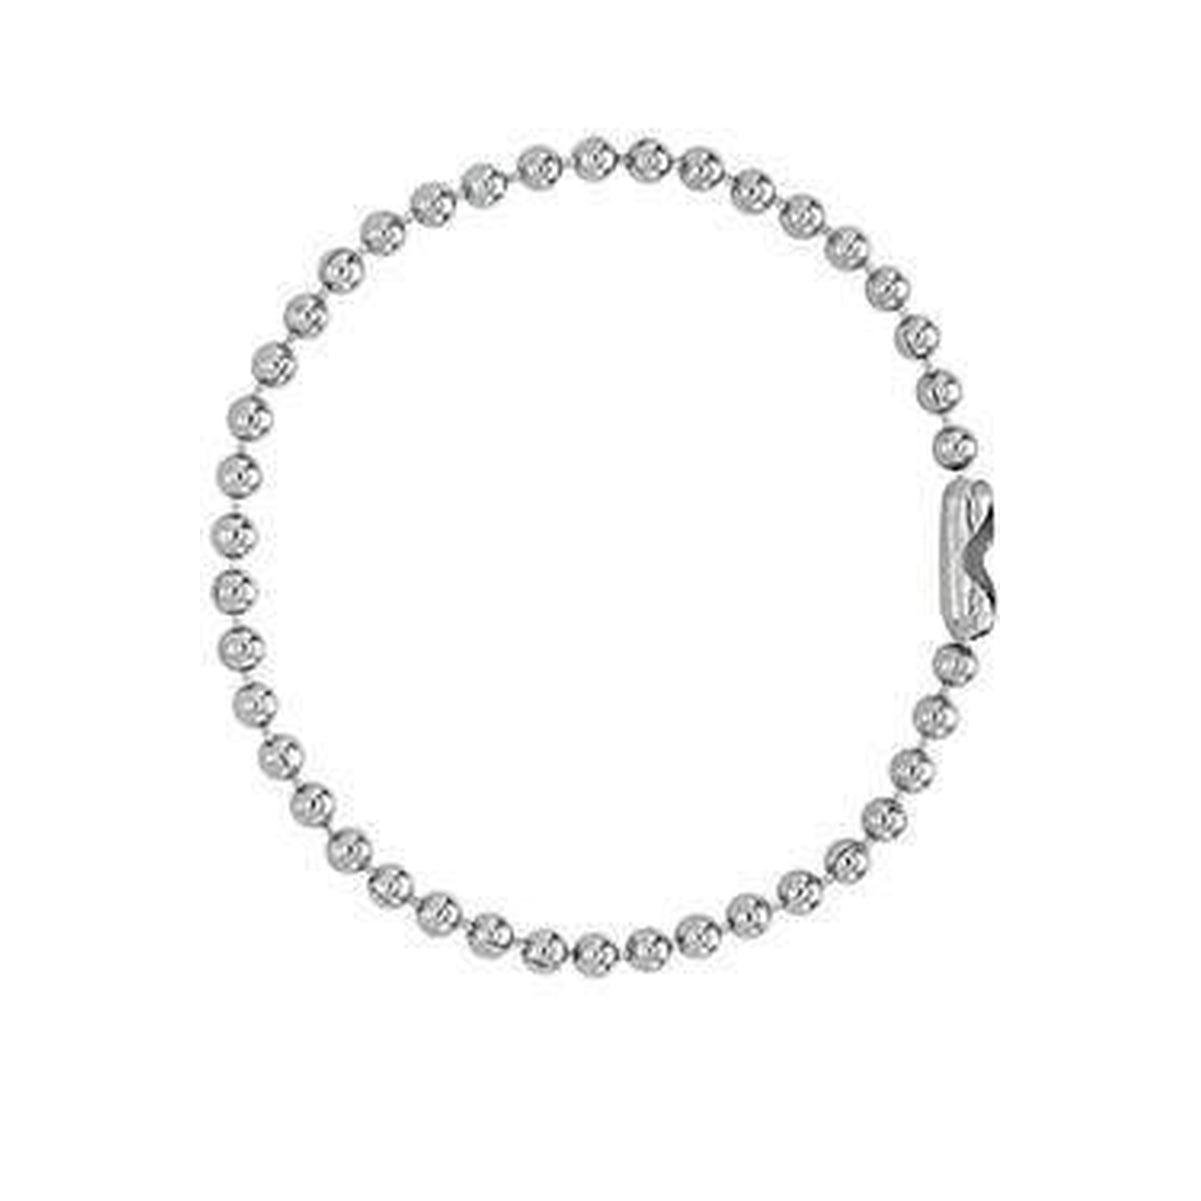 Nickel-Plated Steel Ball Chain, 4, No. 3 Bead Size (P/N 2450-1050